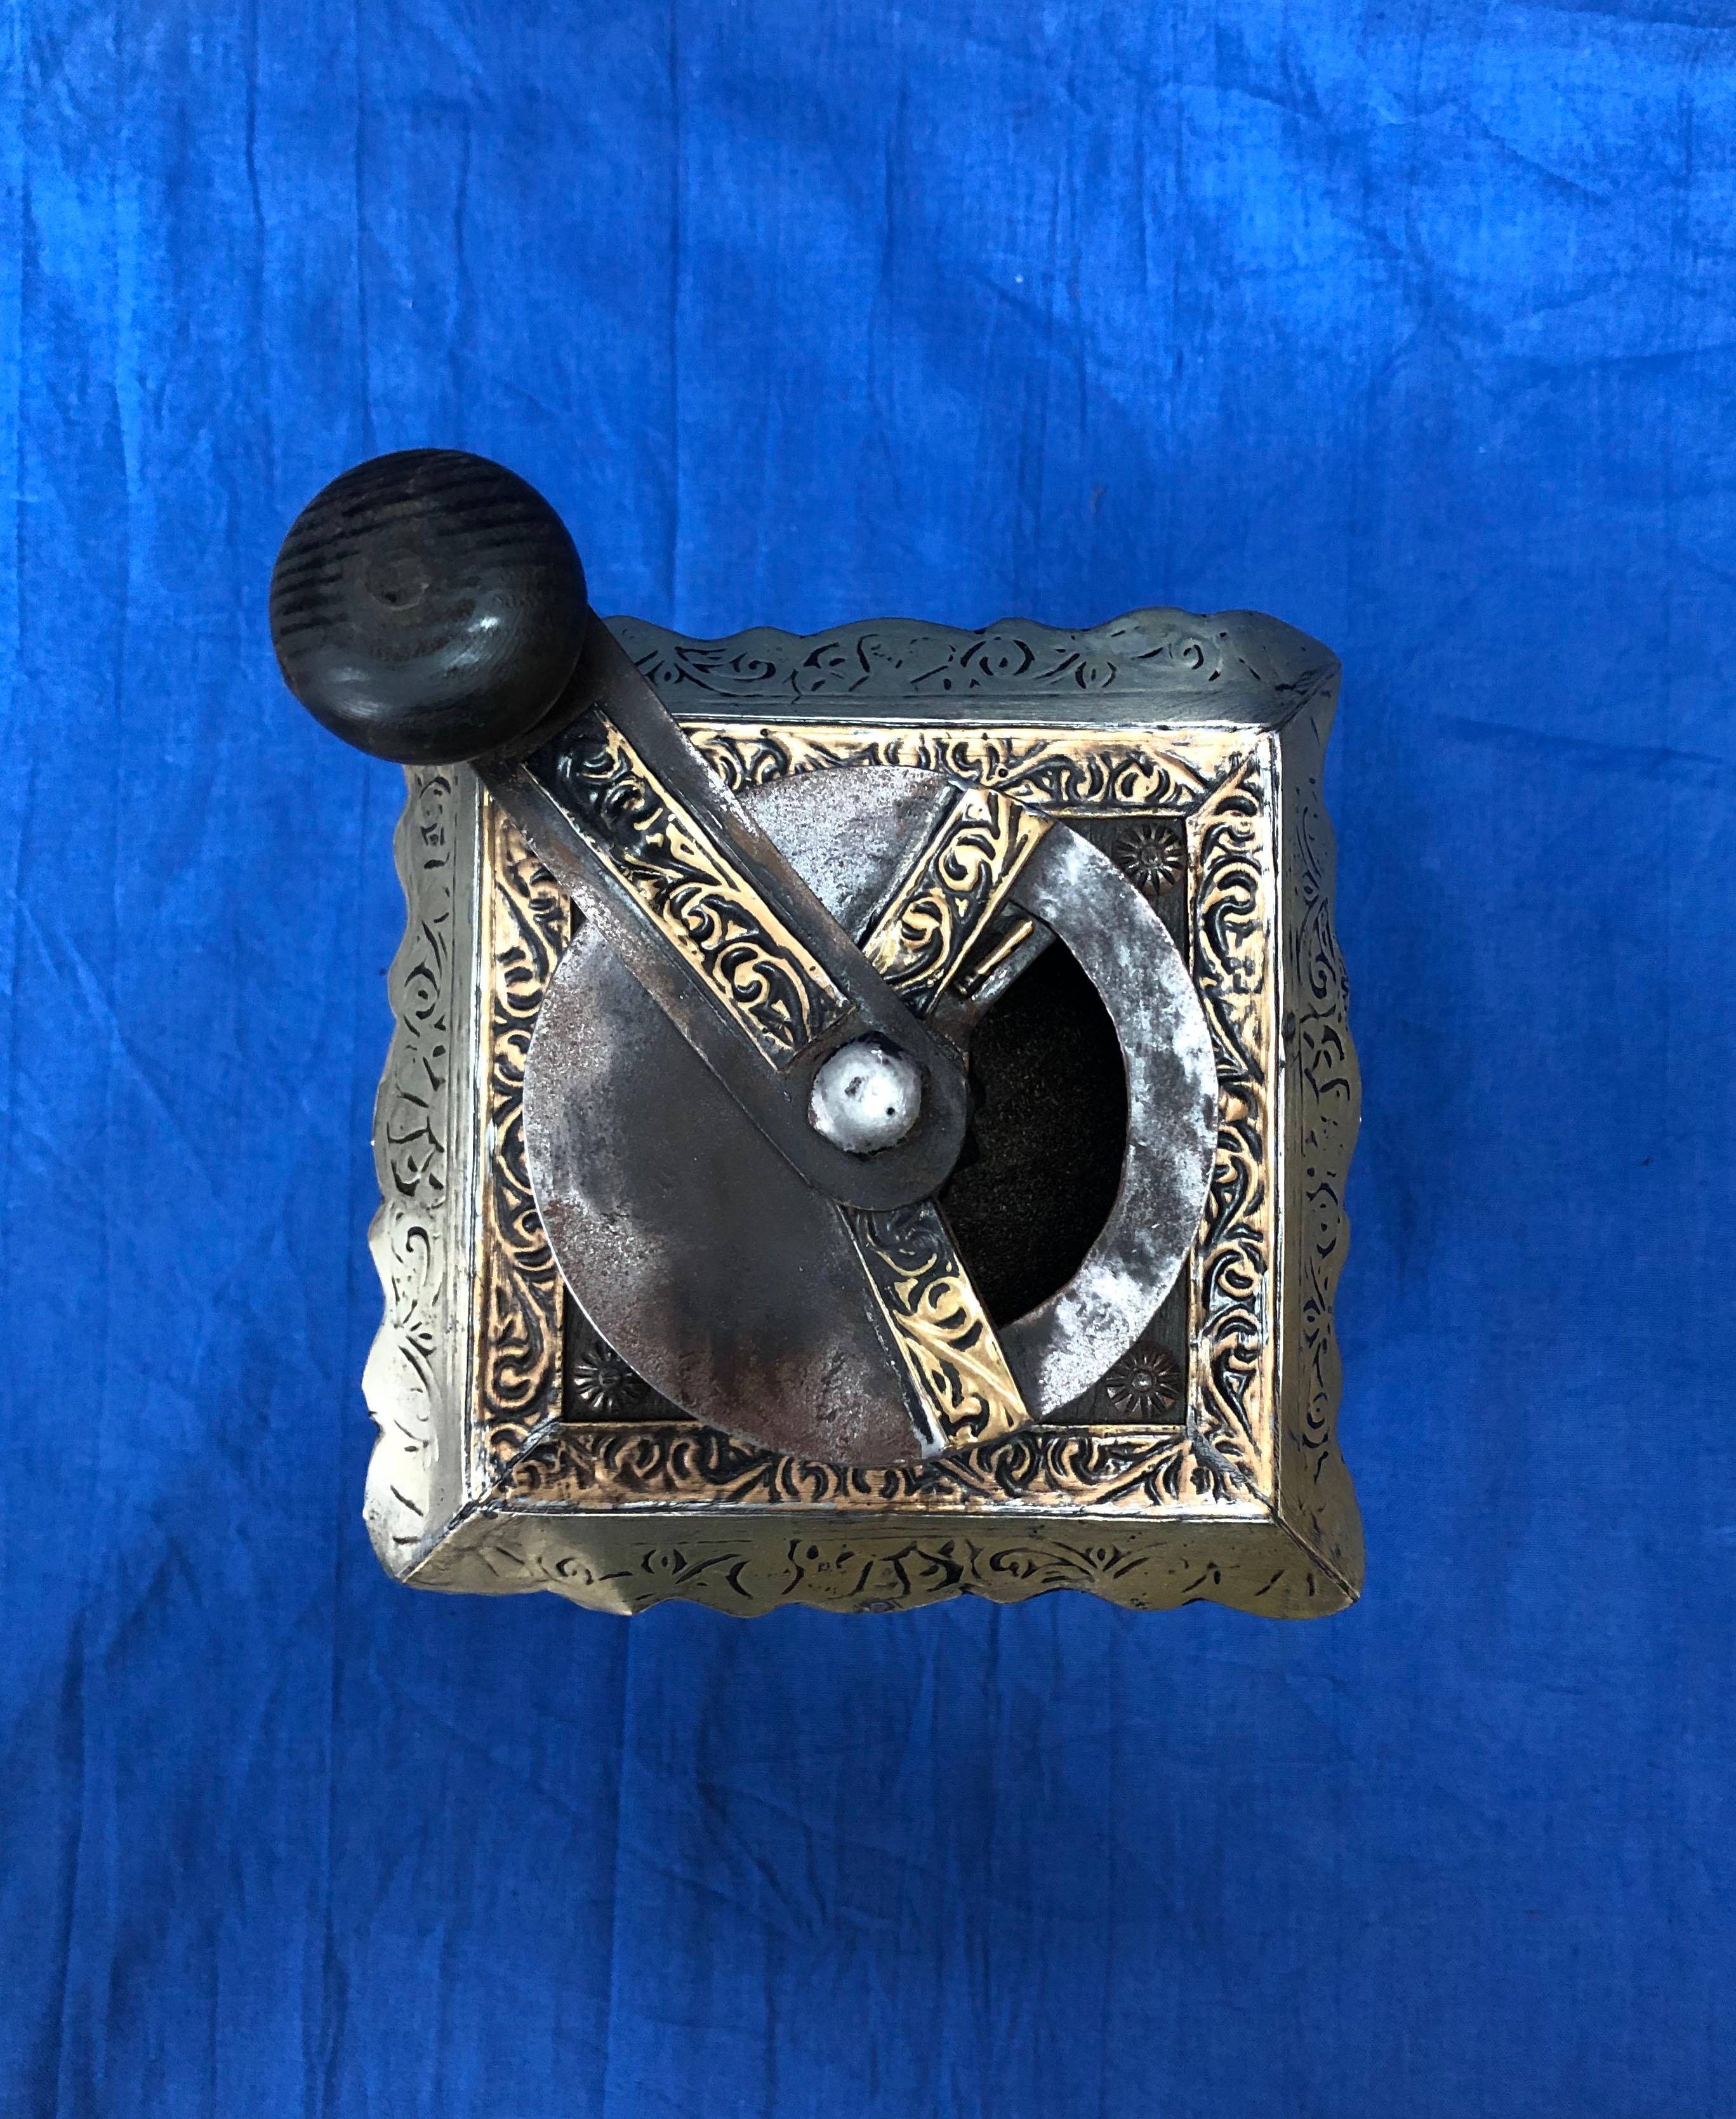 Vintage Handmade Moroccan Coffee Grinder - Silver & Brass Repousse, Ebony Wood In Good Condition For Sale In Vineyard Haven, MA